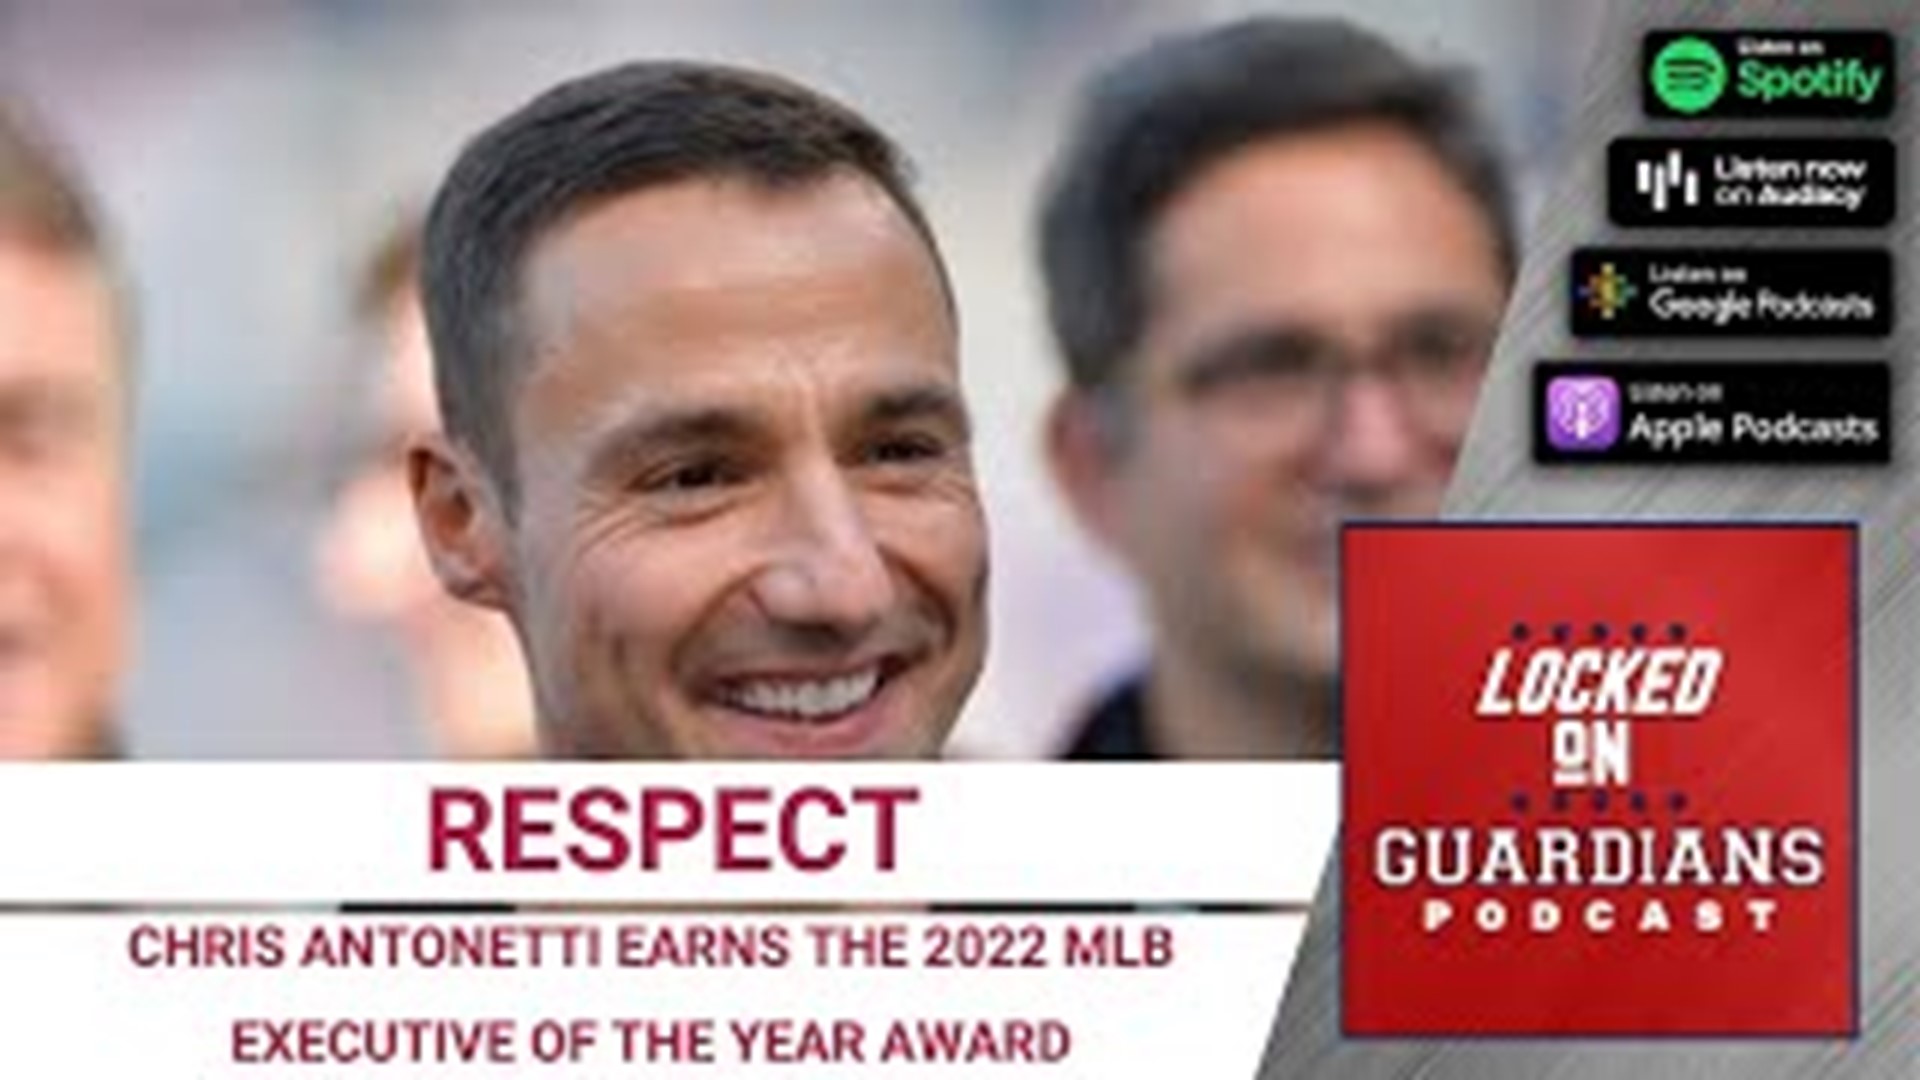 Chris Antonetti was named the 2022 MLB Executive of the Year. We discuss why and how Antonetti might have earned this award from his peers.